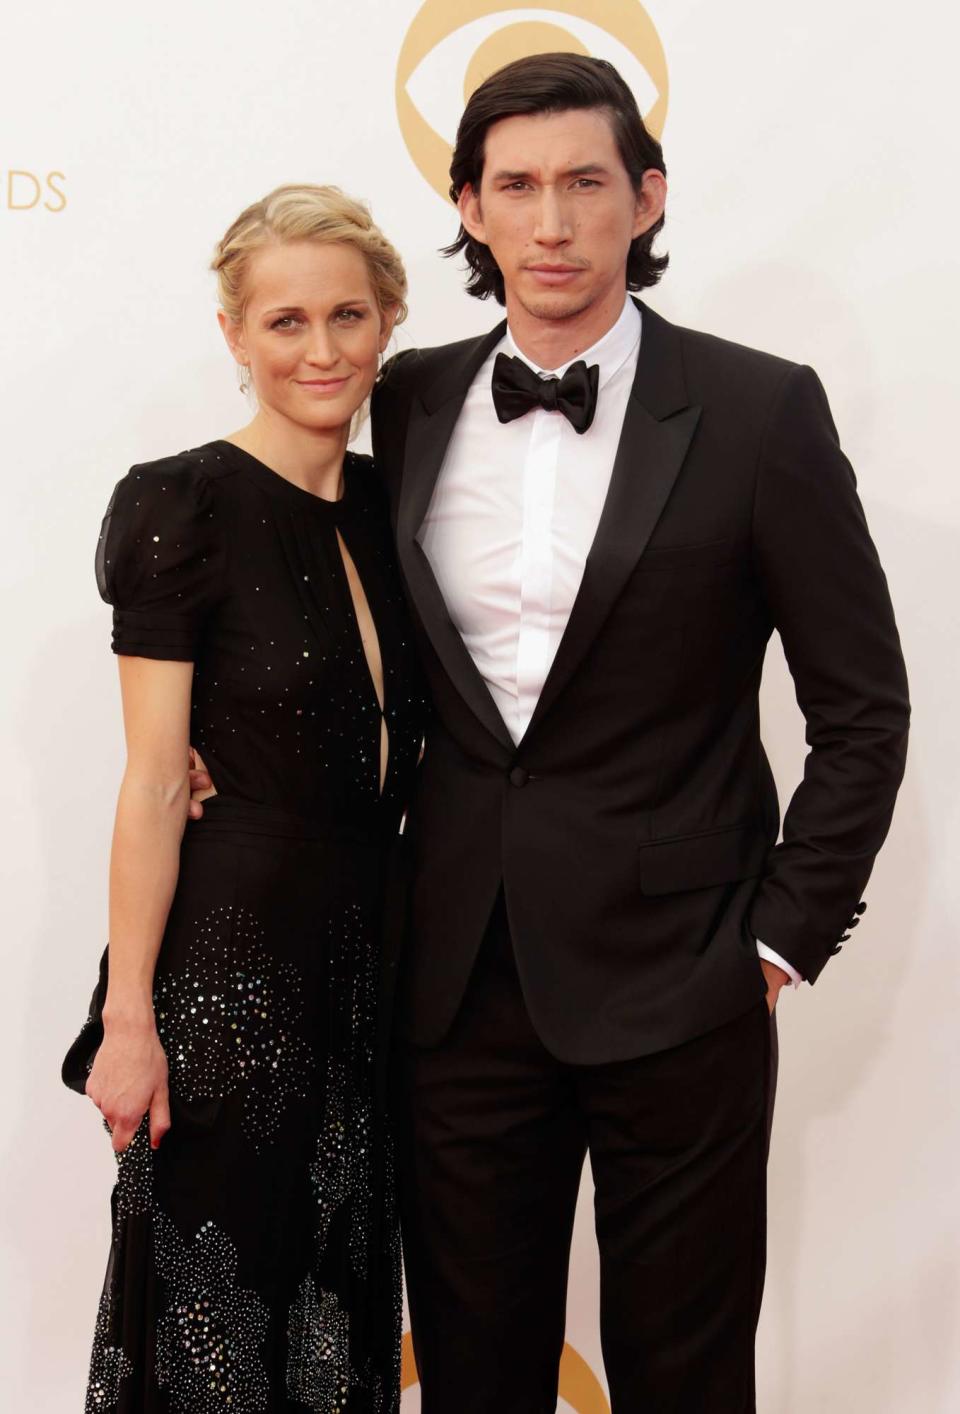 Joanne Tucker and Adam Driver arrive at the 65th Annual Primetime Emmy Awards held at Nokia Theatre L.A. Live on September 22, 2013 in Los Angeles, California